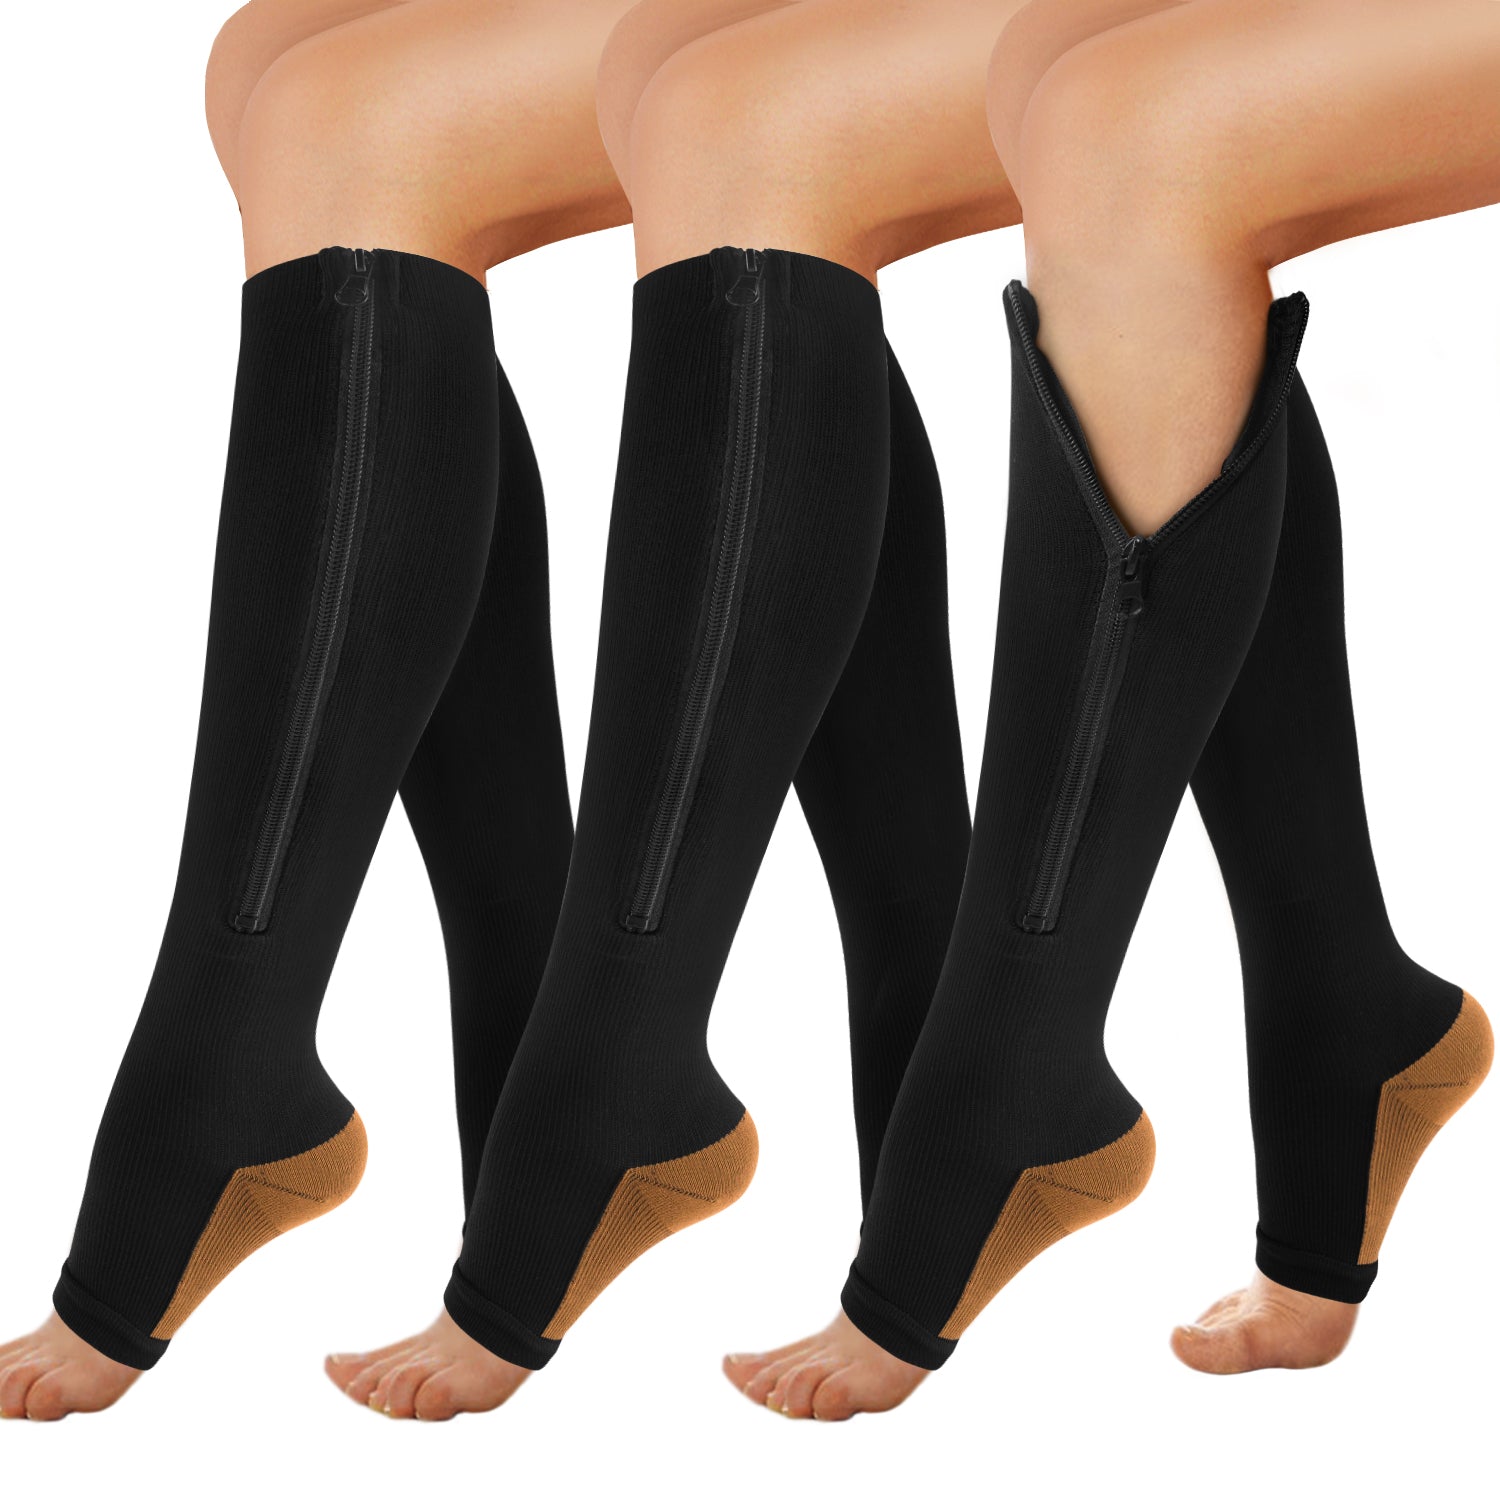 3-Pairs Copper Open-Toed Leg Stocking with Zipper（20-30mmHg